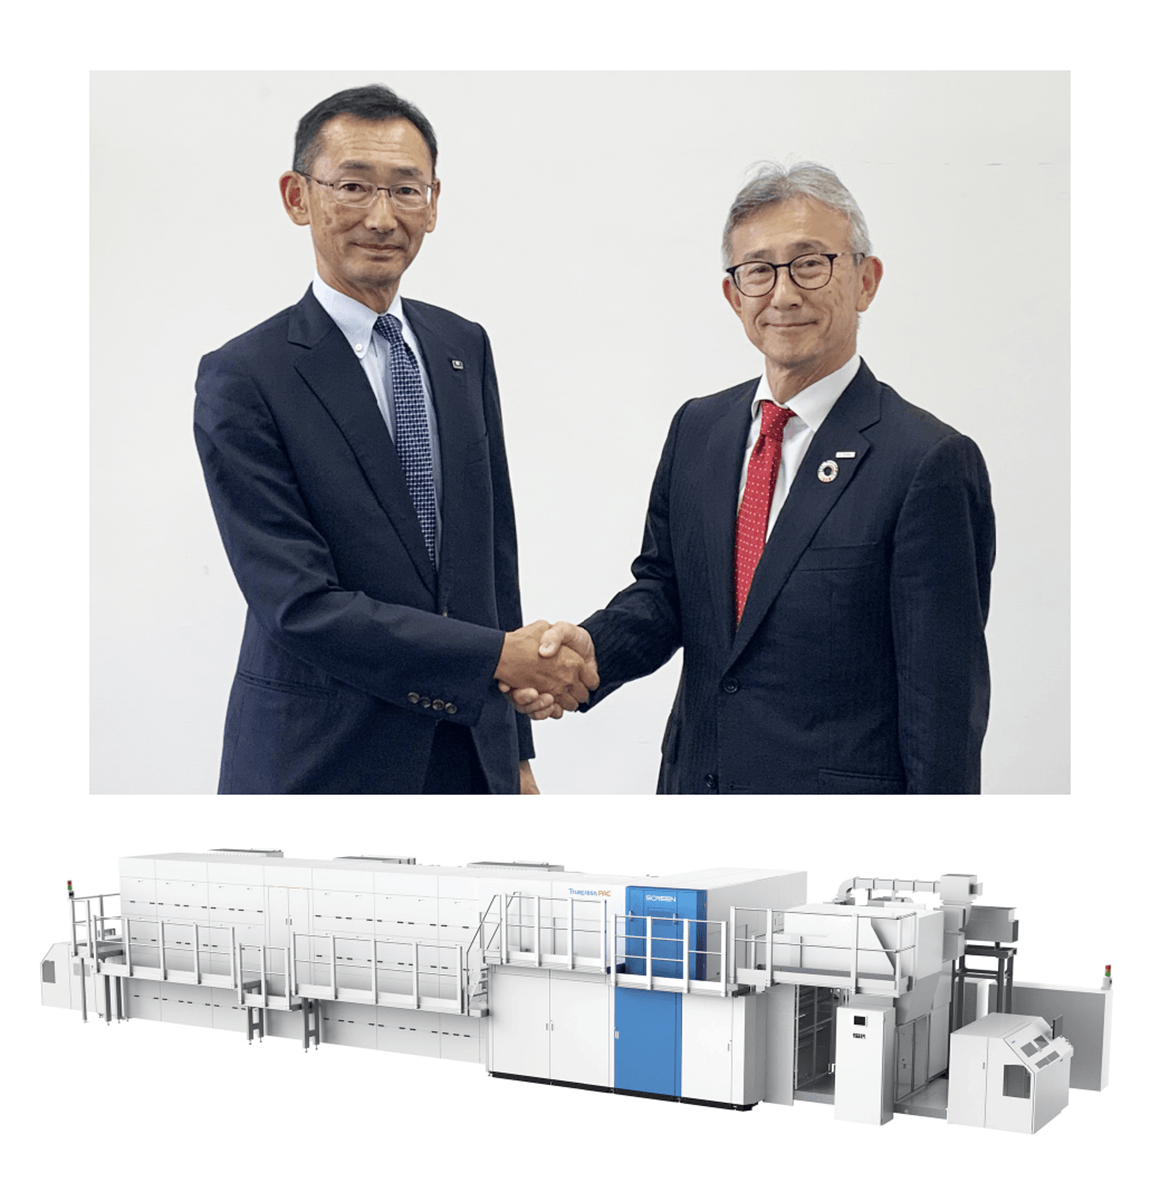 SCREEN and Chiyoda Gravure Partner to Promote Digital Printing of Flexible Packaging Materials